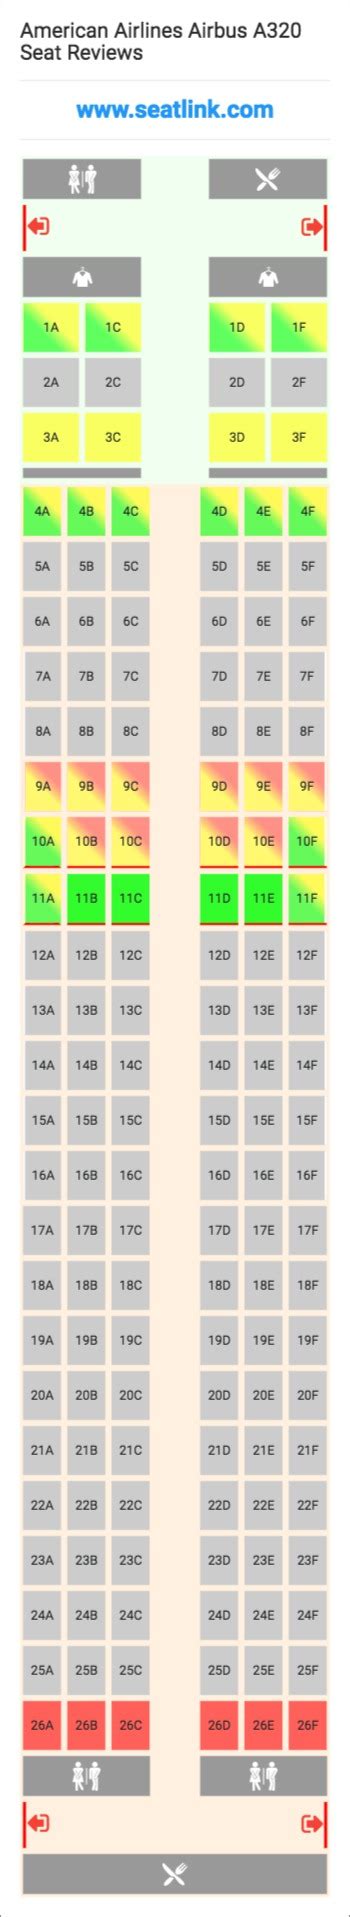 American Airlines Airbus A320 Seating Chart Updated December 2019